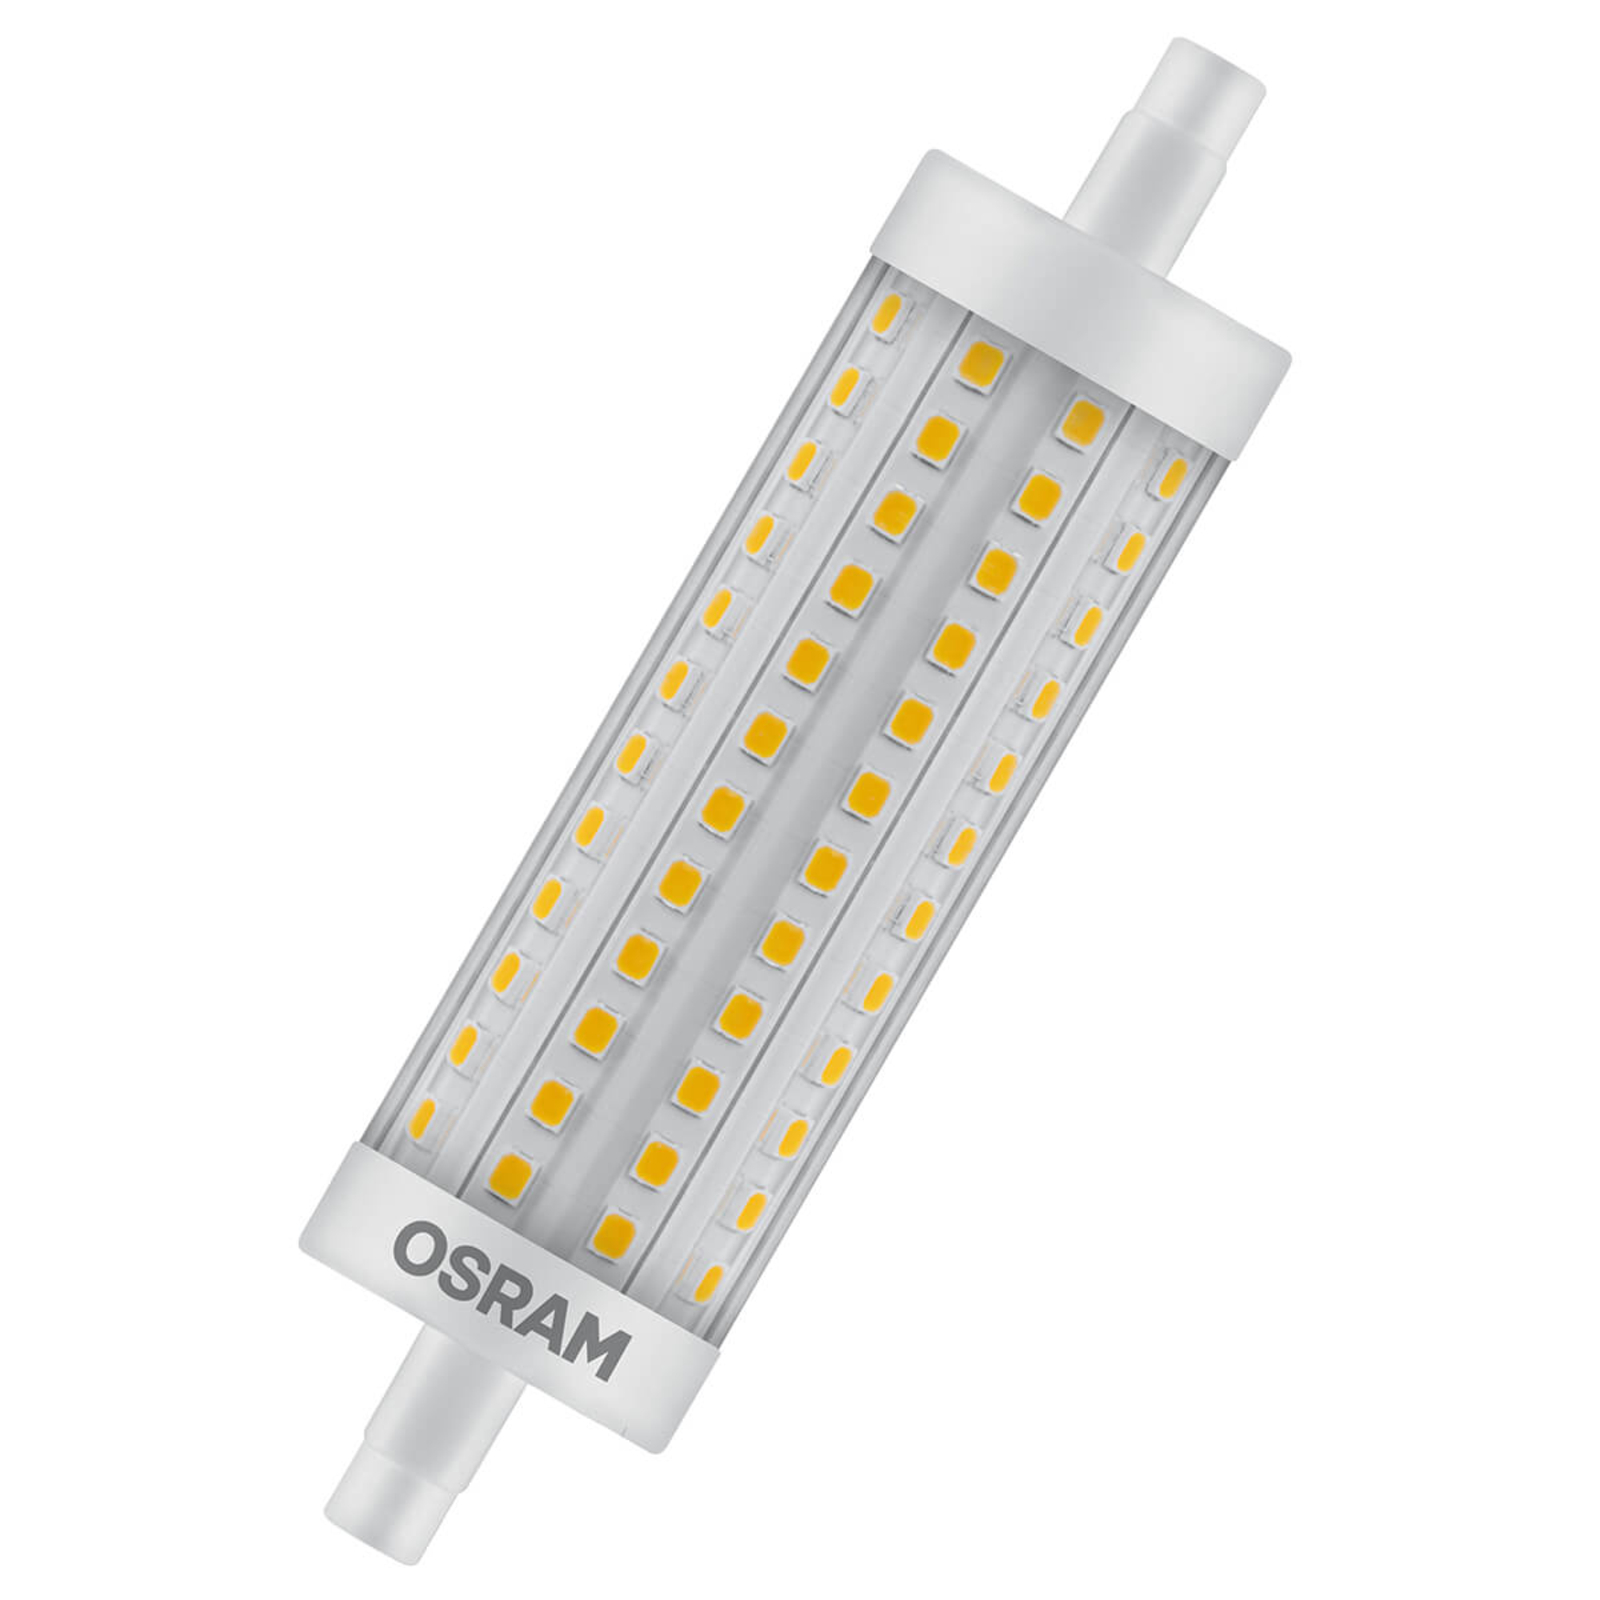 OSRAM tube LED R7s 15 W 11,8 cm 827 dimmable